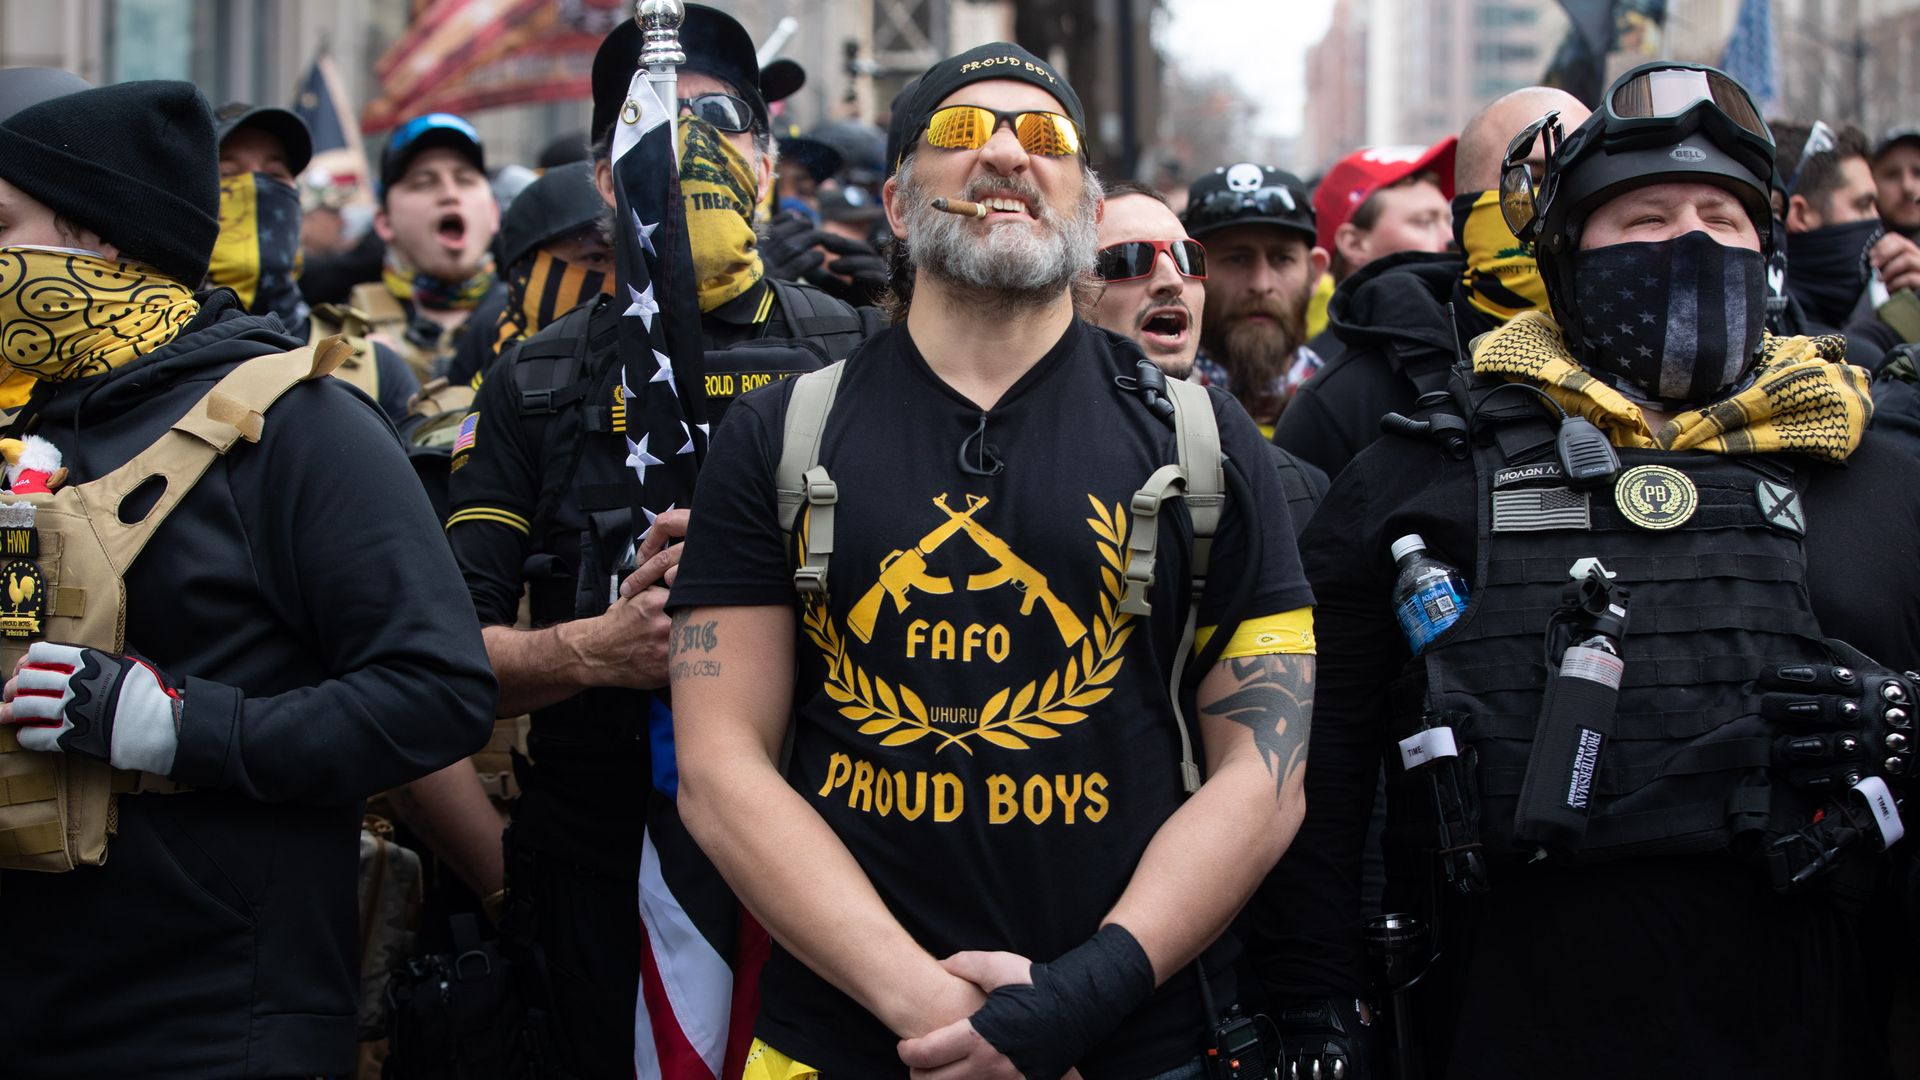 Proud Boys march in support of President Donald Trump in Washington, DC, December 12